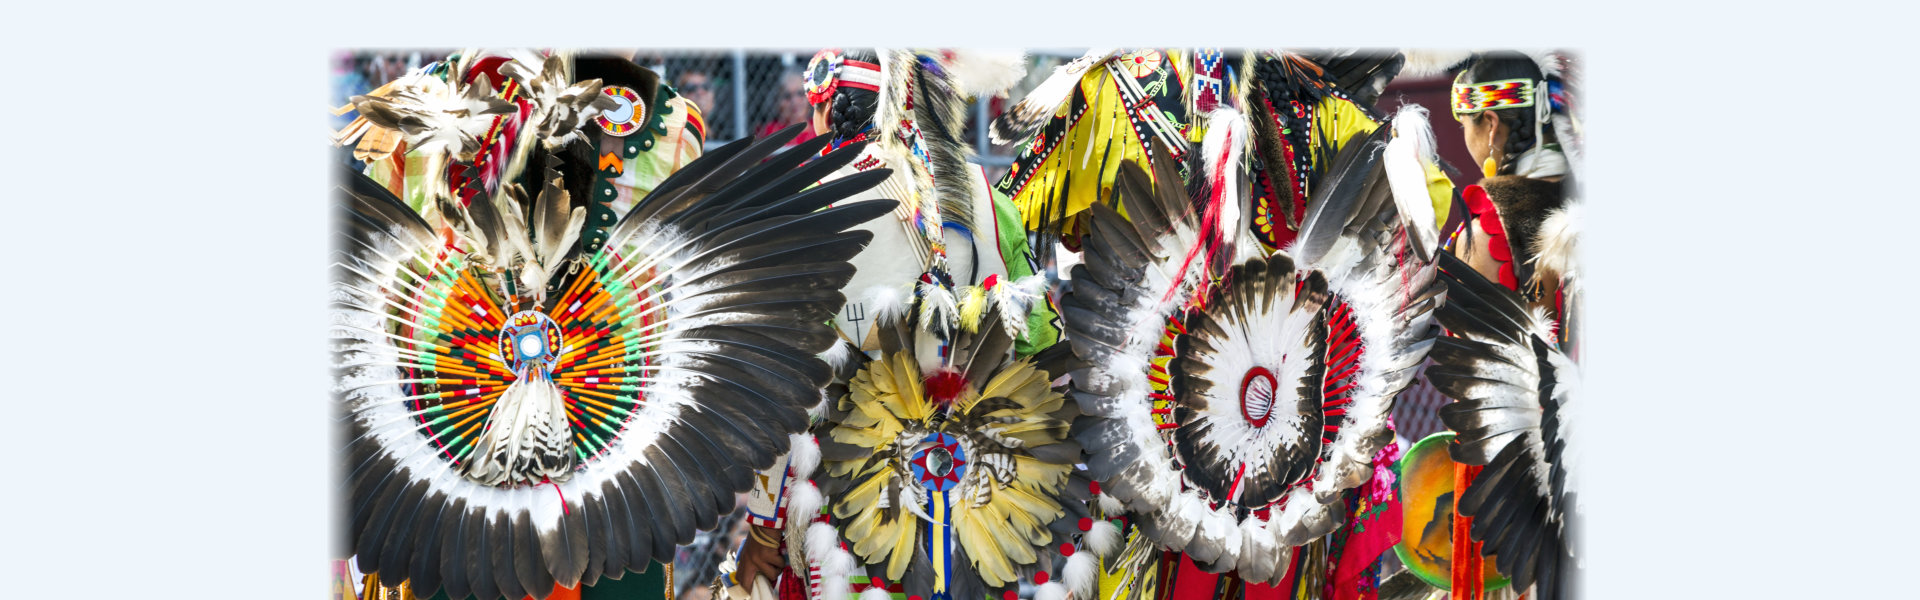 A group of native american feathers hanging on the wall.